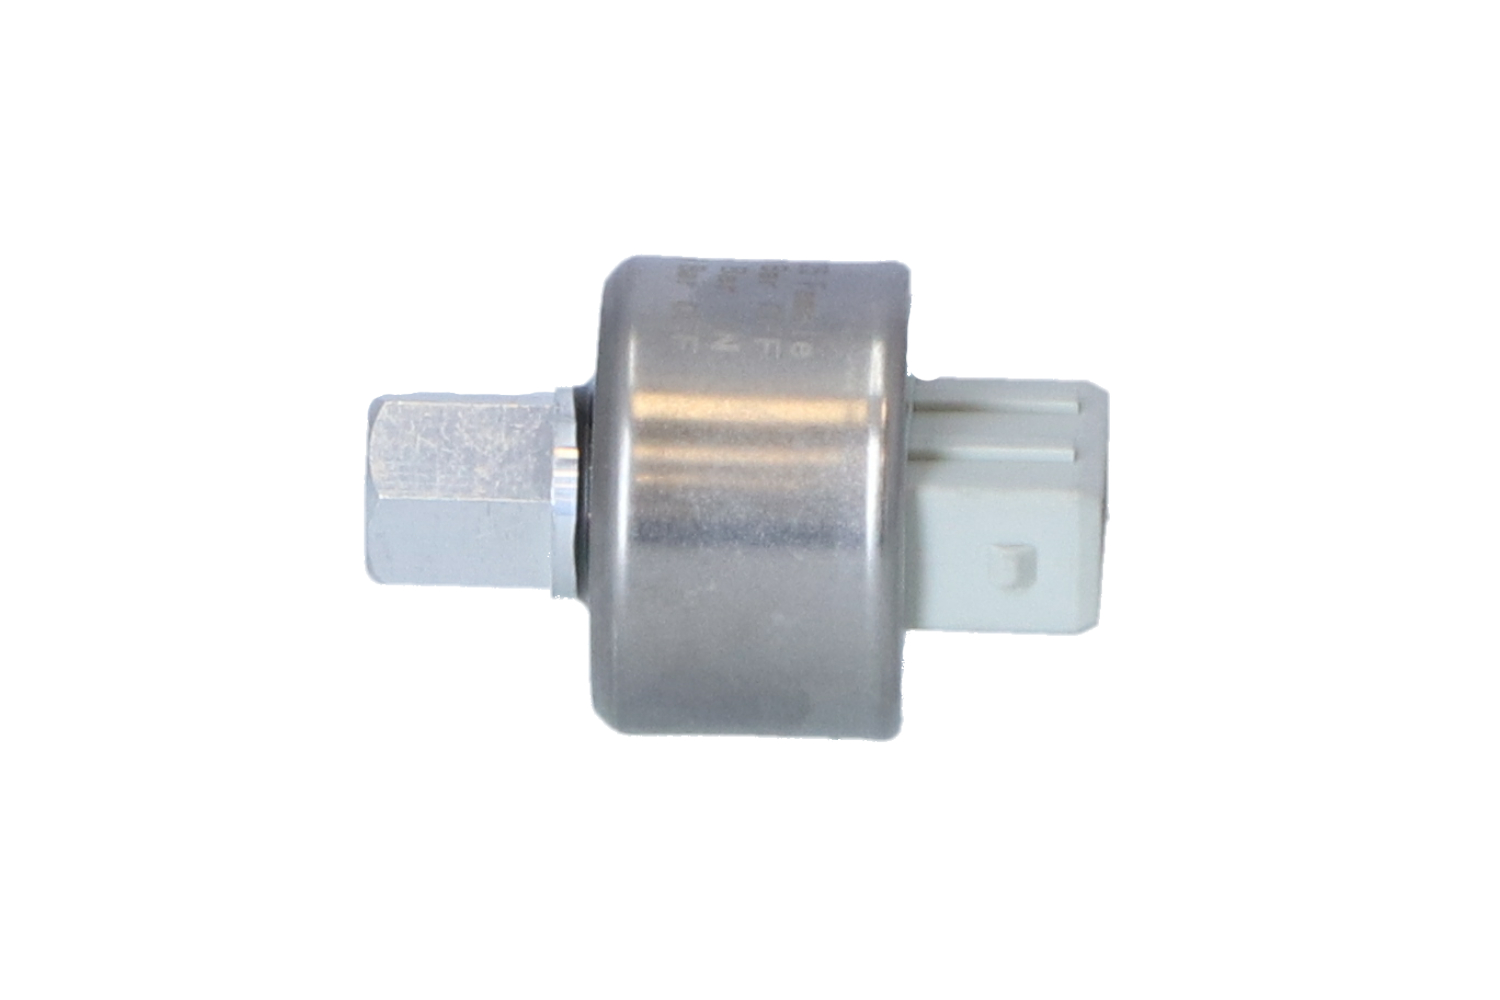 NRF 38928 Air conditioning pressure switch with seal ring